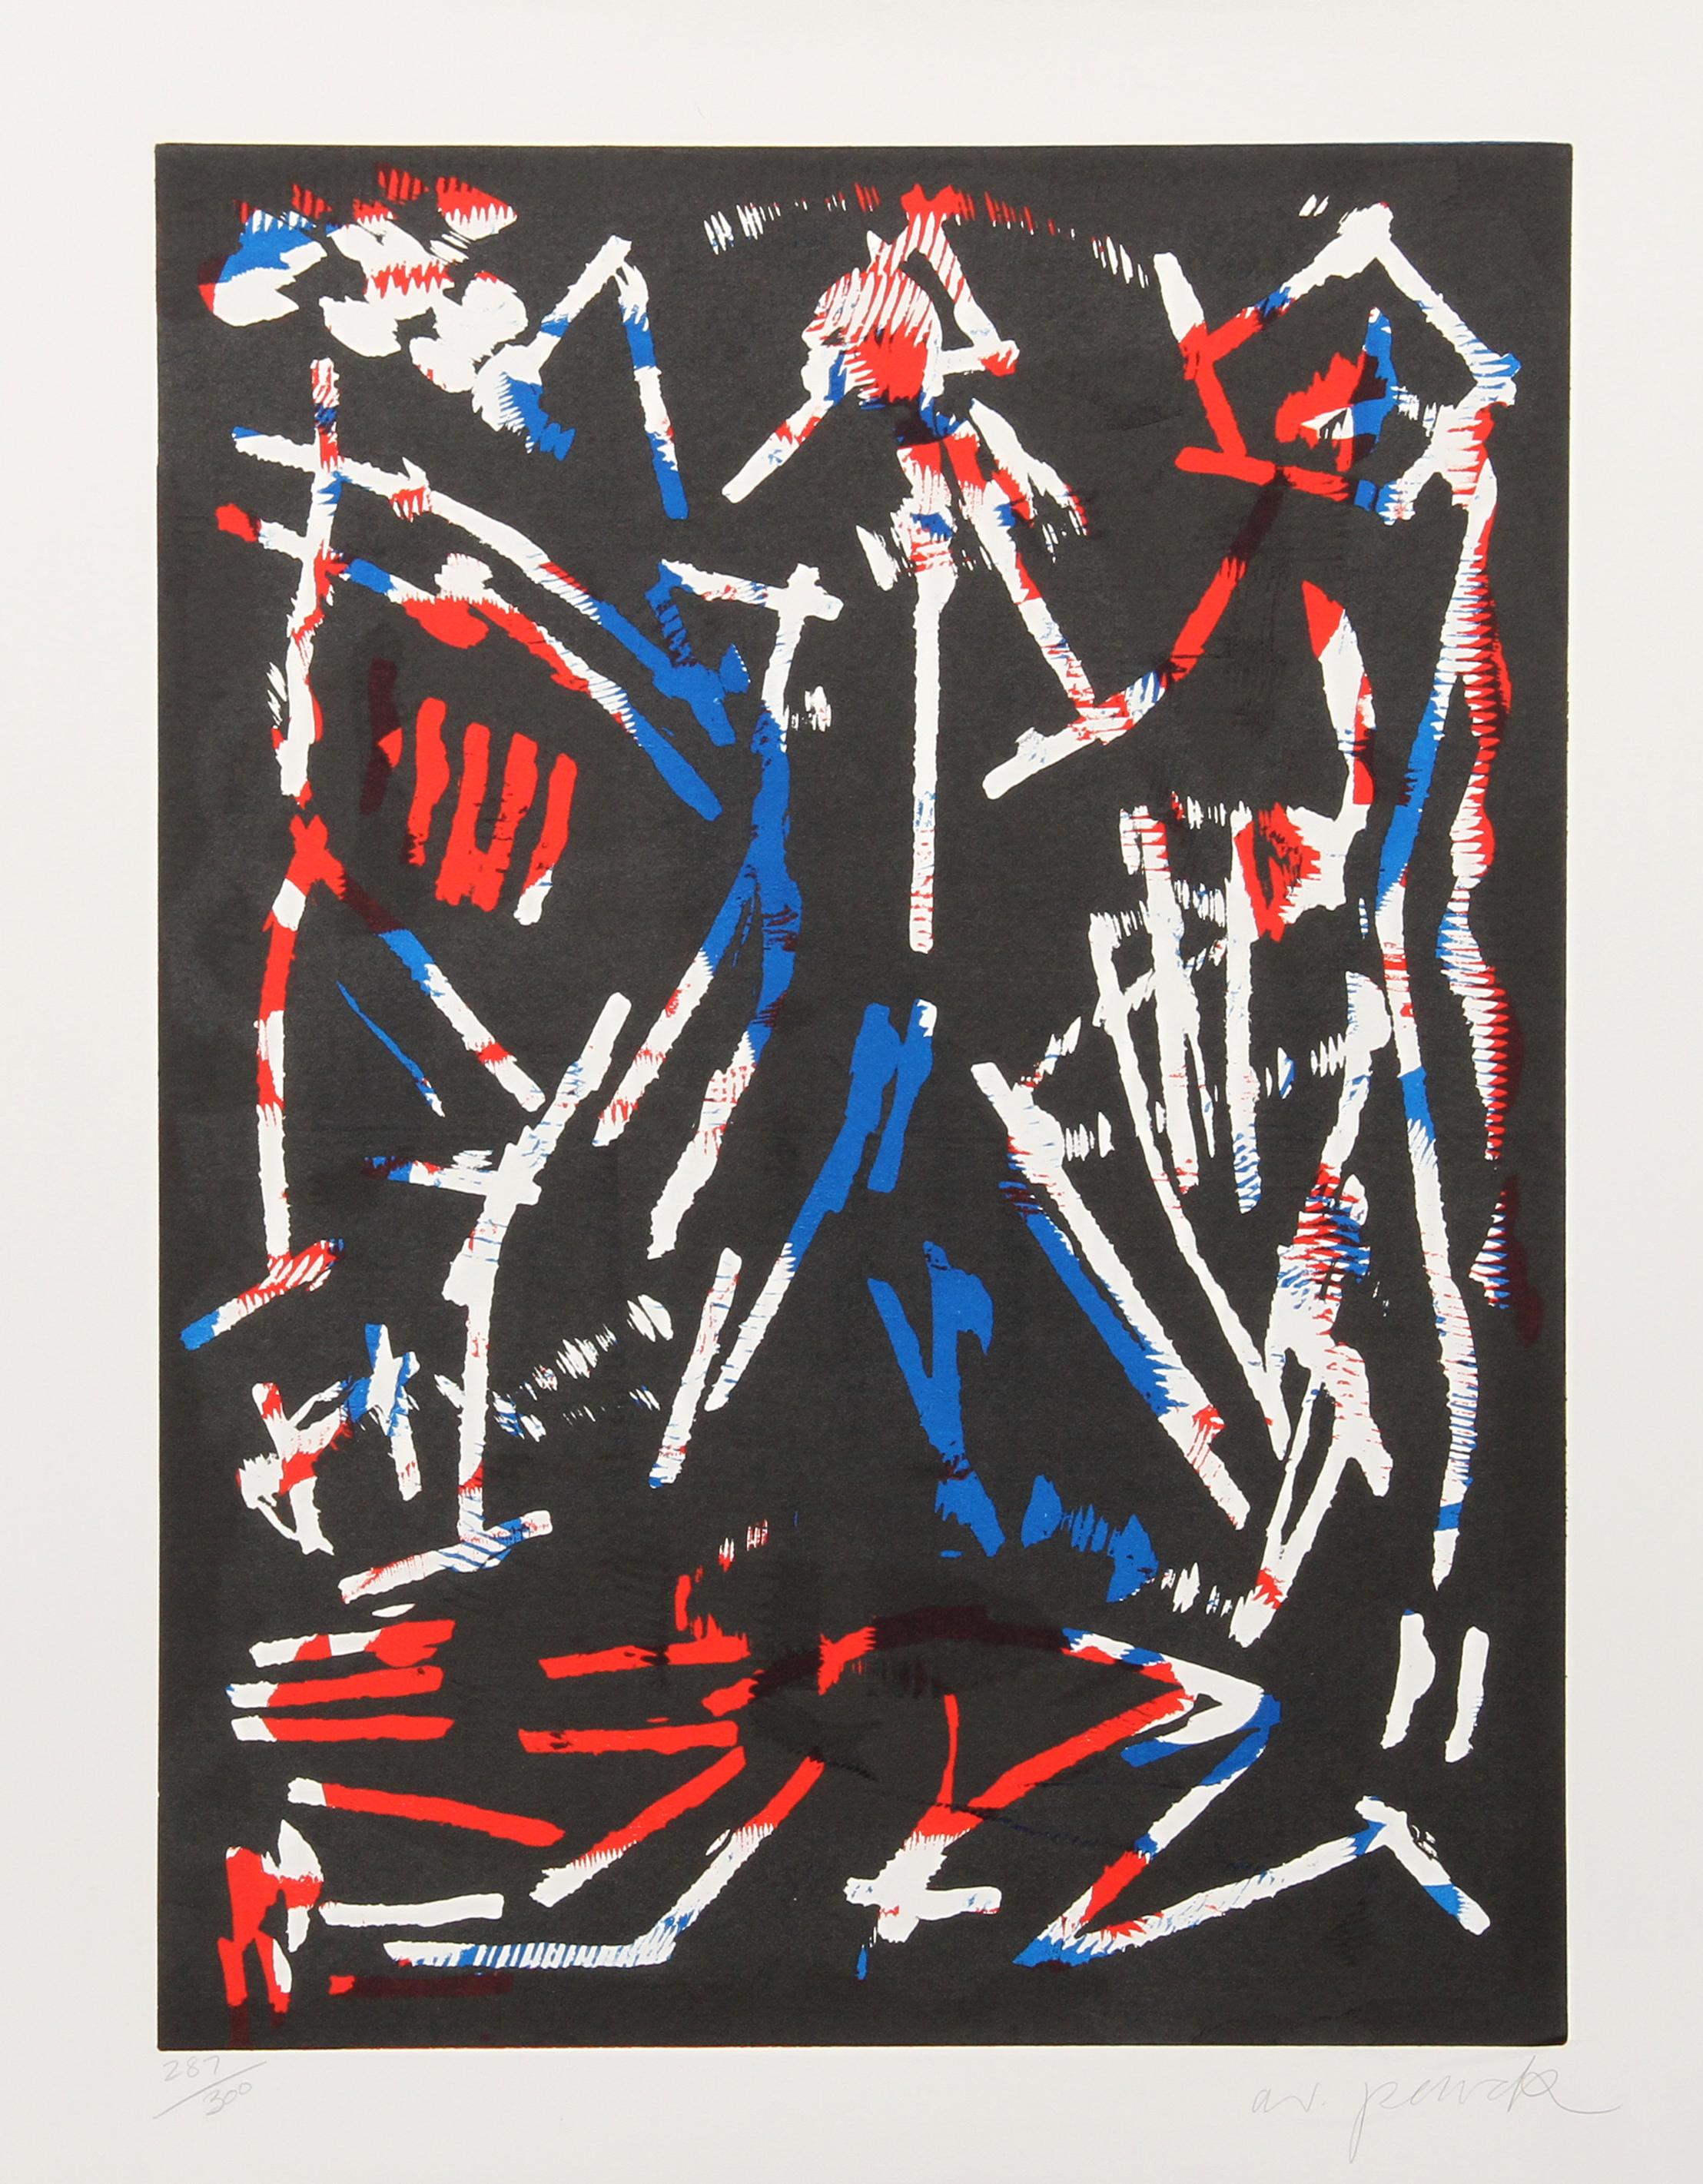 Mul, Bul Dang & Sentimentality, Abstract Woodblock by A.R. Penck